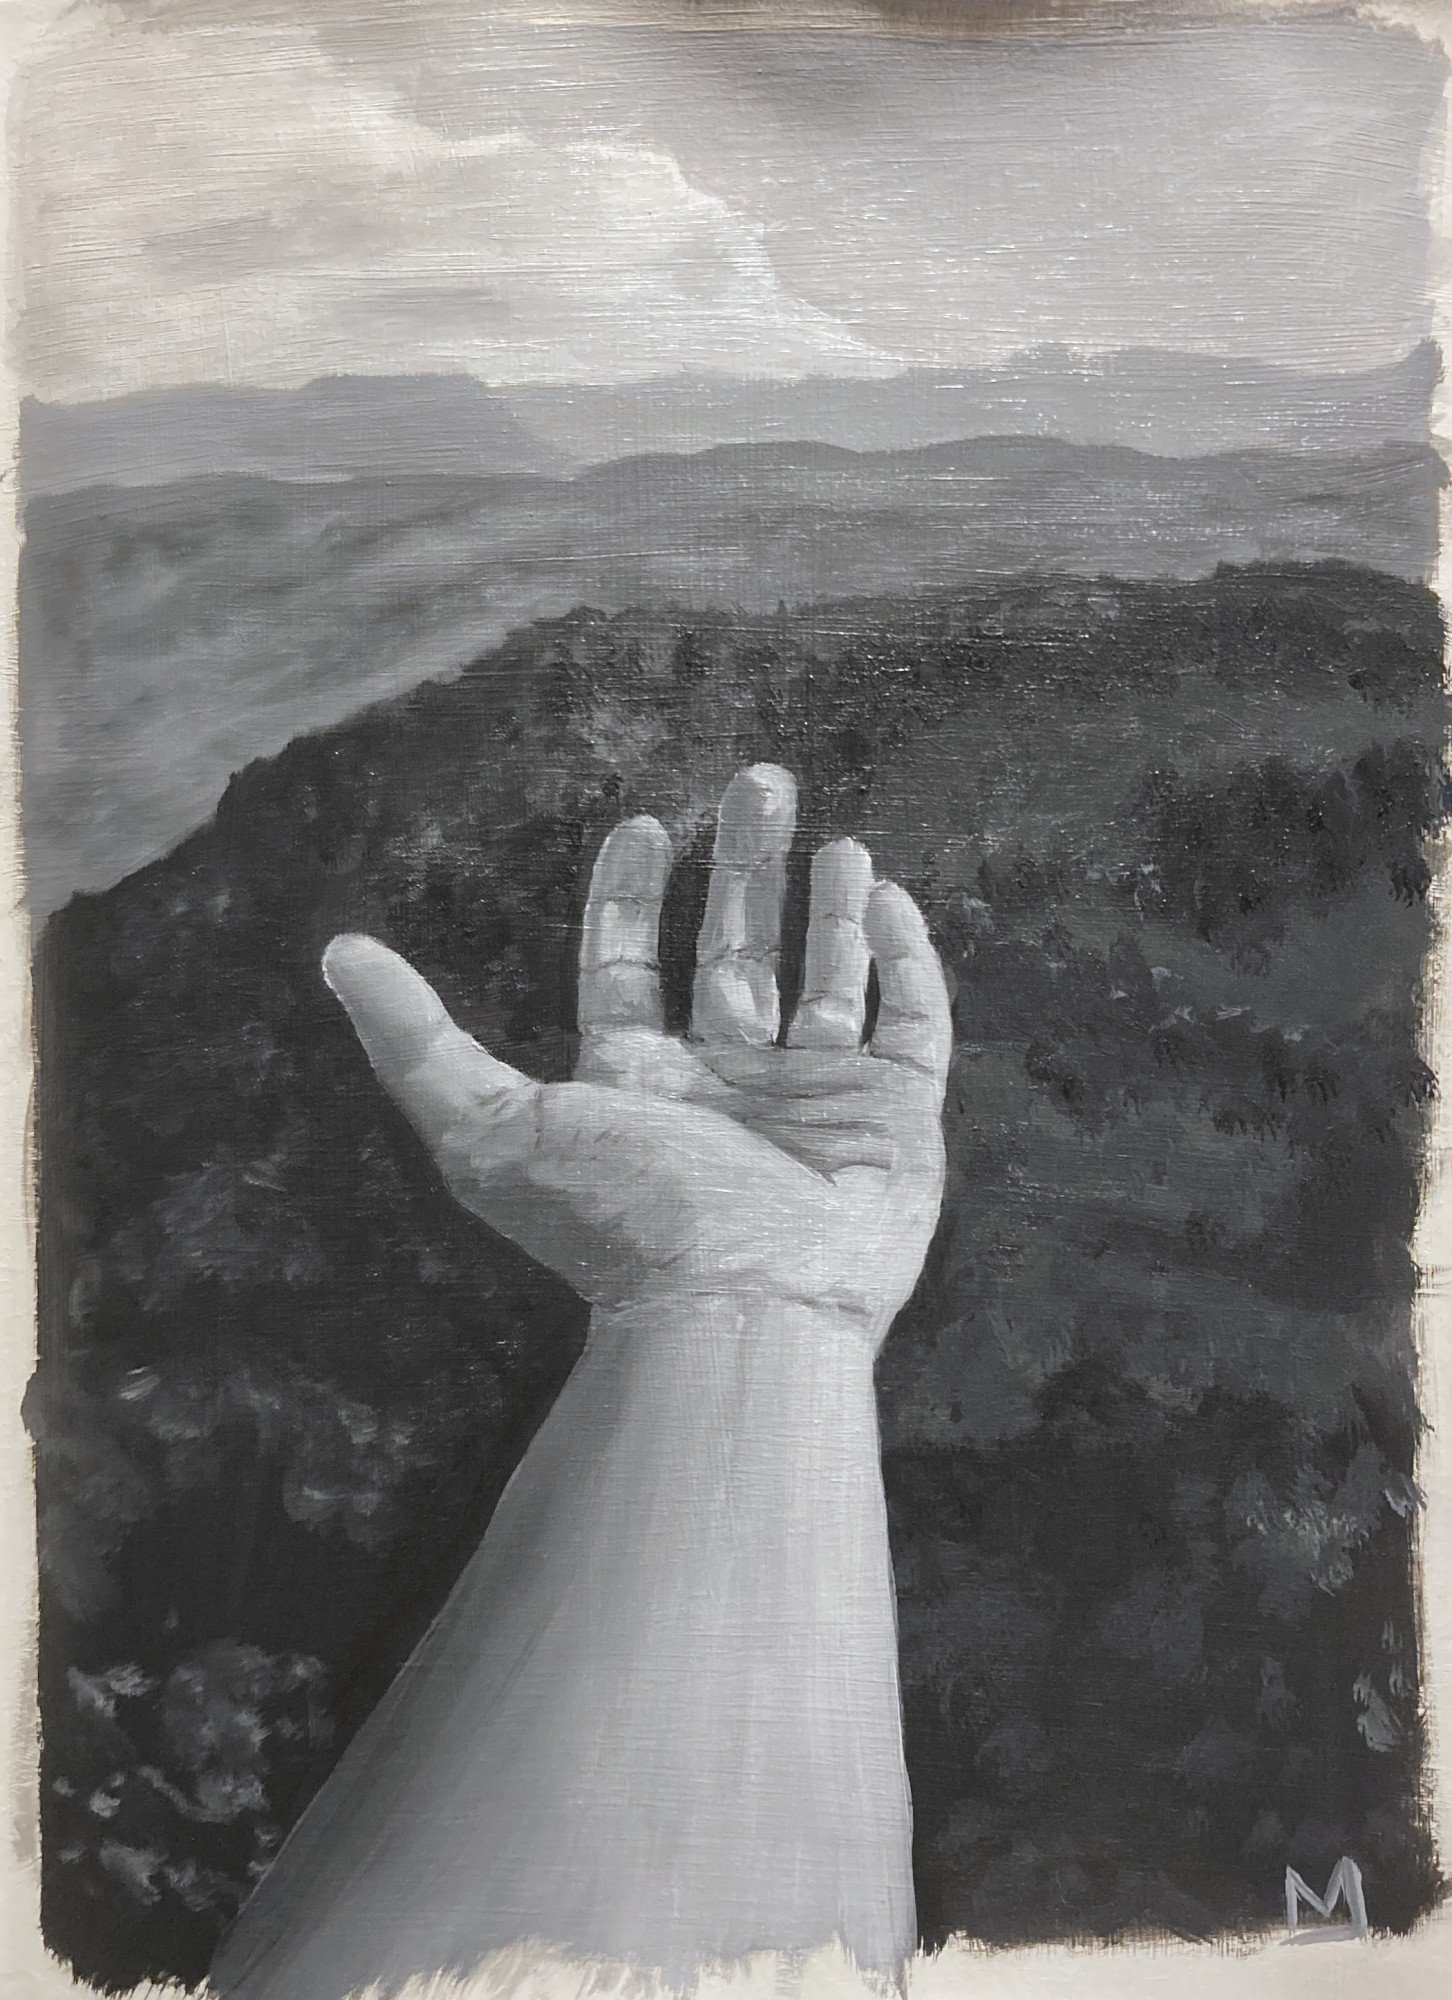 A black and white oil painting of a hand reaching out over a landscape of rolling hills